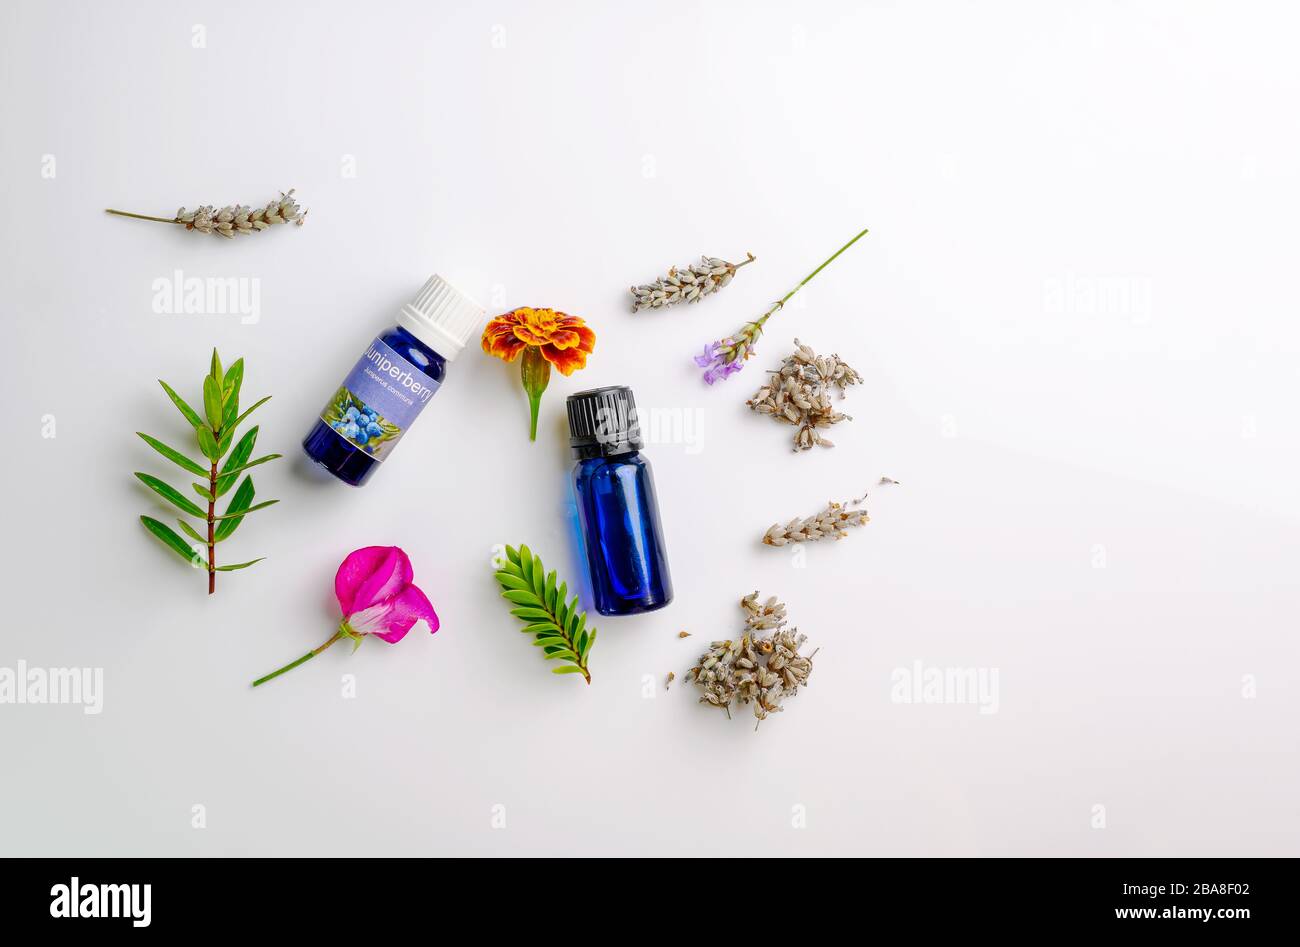 Bottles of Aromatherapy Essential oils, fresh and  dried lavender seeds, flower petal and herbs Stock Photo